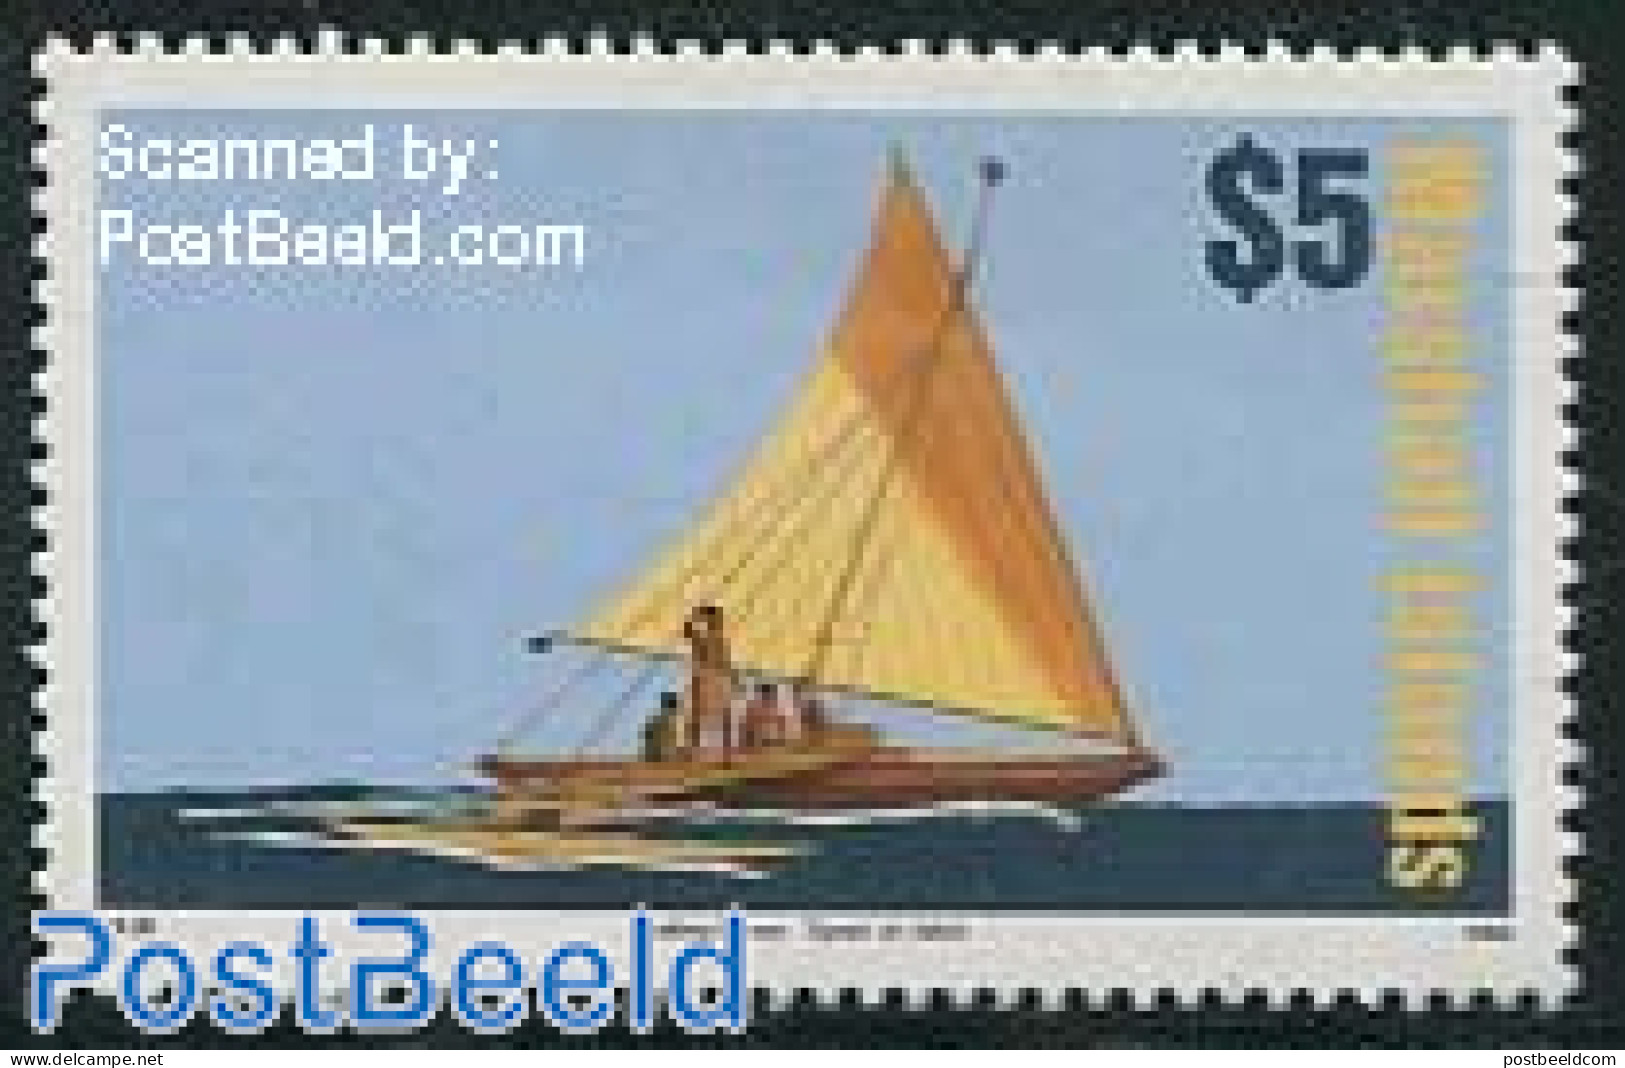 Marshall Islands 1994 Definitive, Boat 1v, Mint NH, Sport - Transport - Kayaks & Rowing - Ships And Boats - Rowing